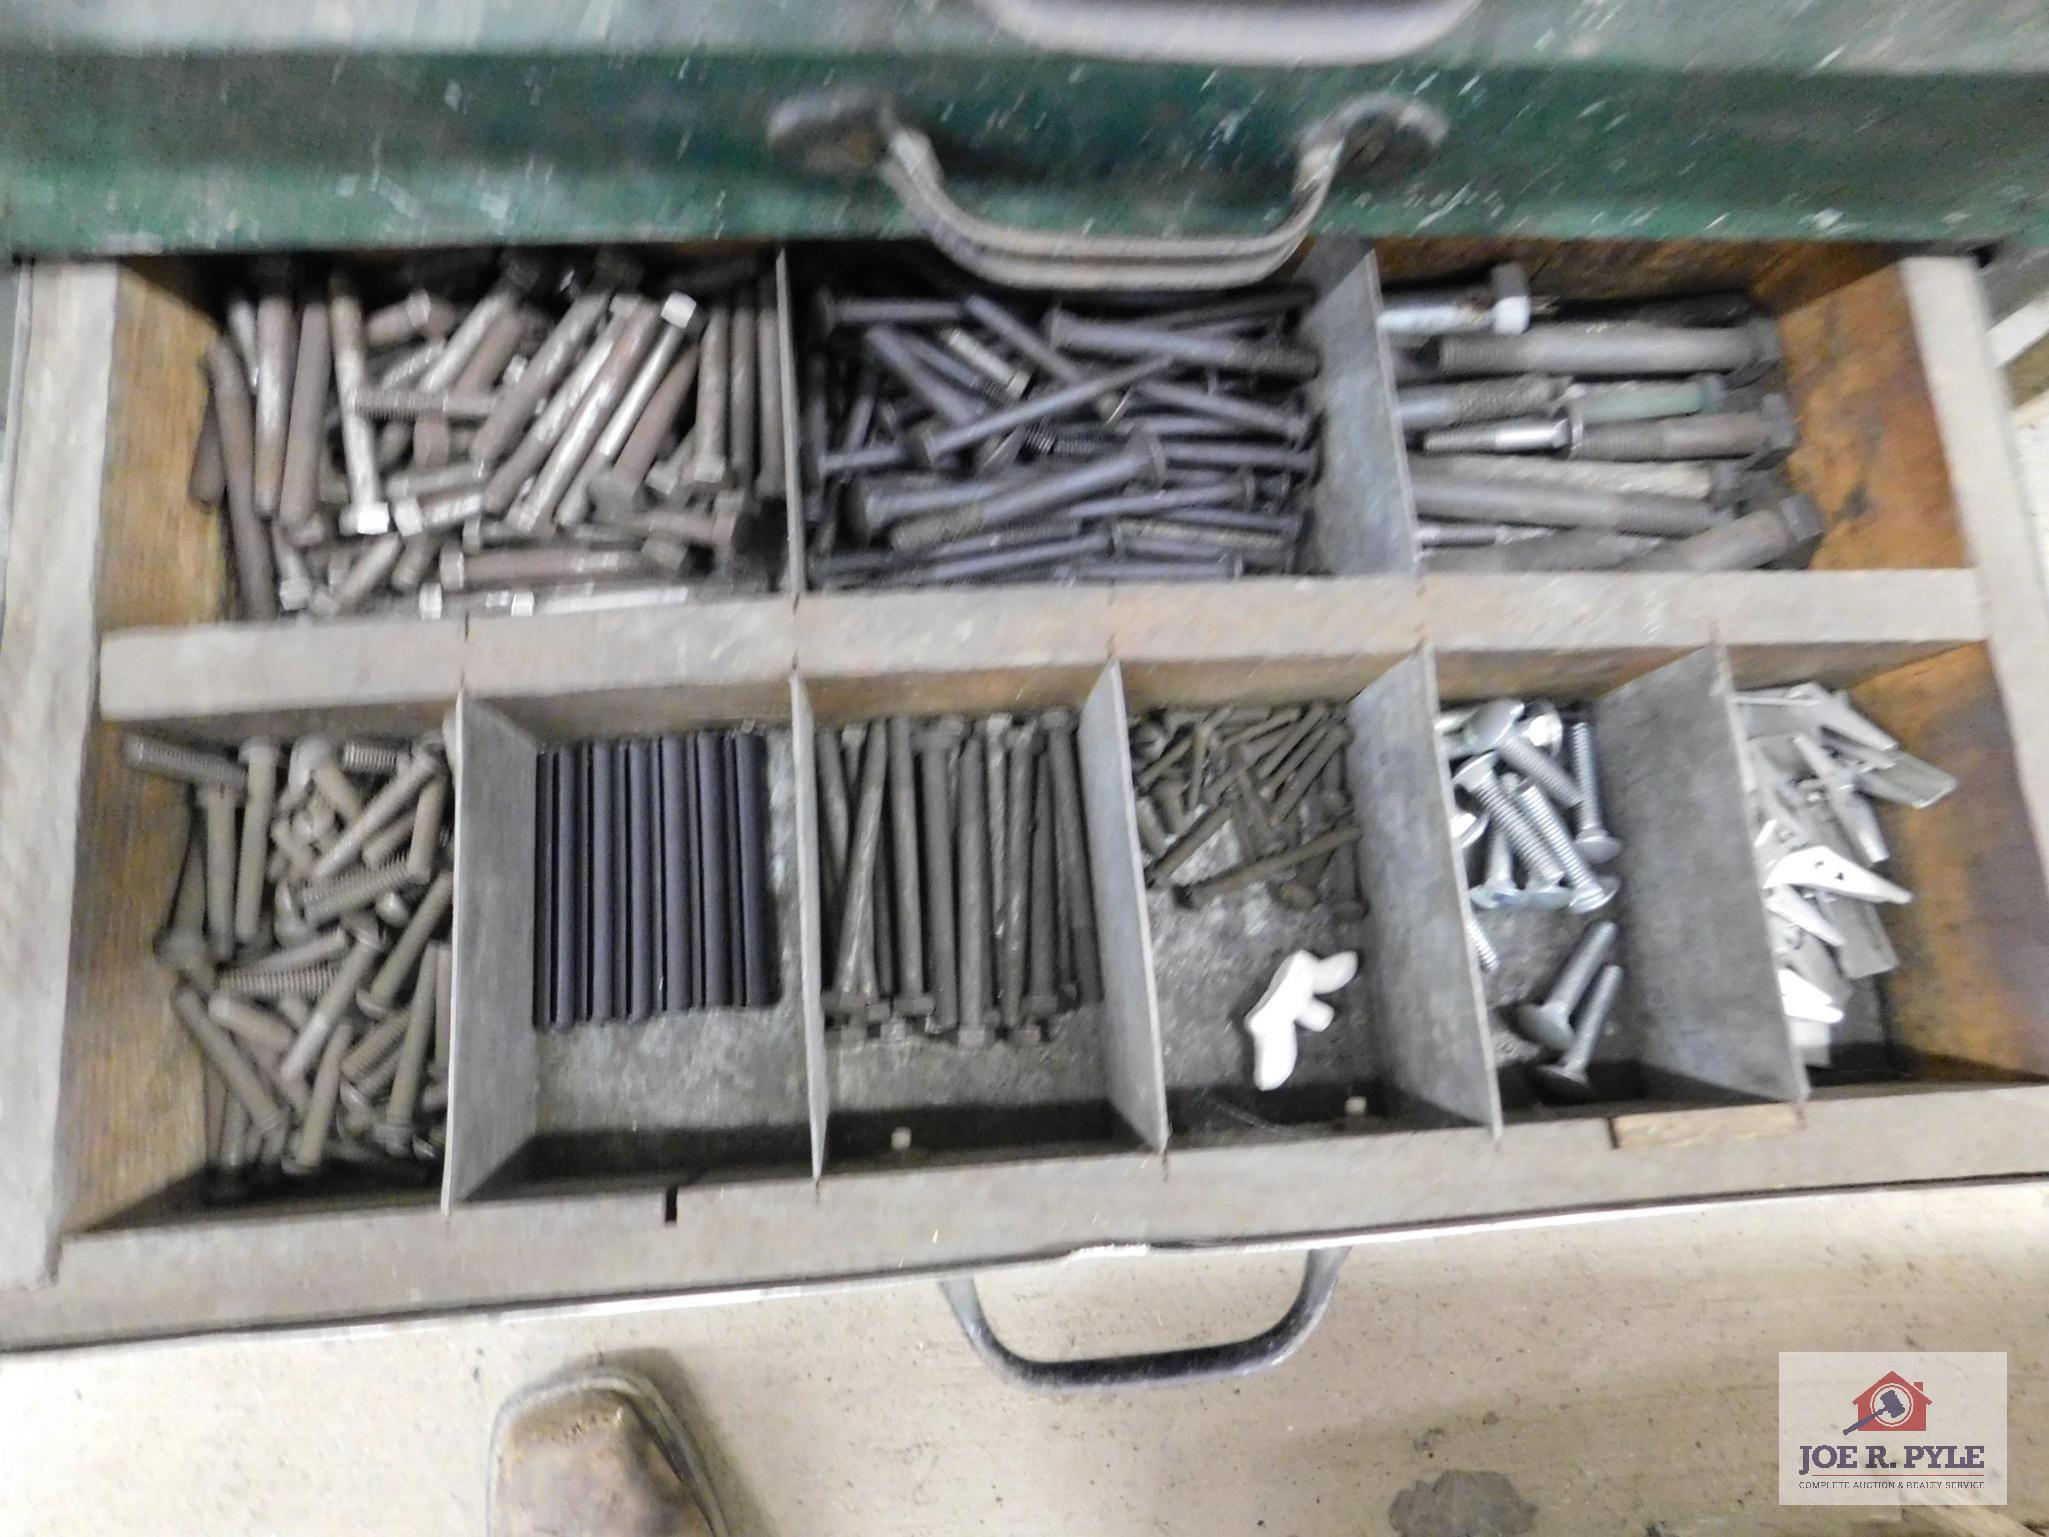 1 Section of work bench w/ all contents of drawers, bolts